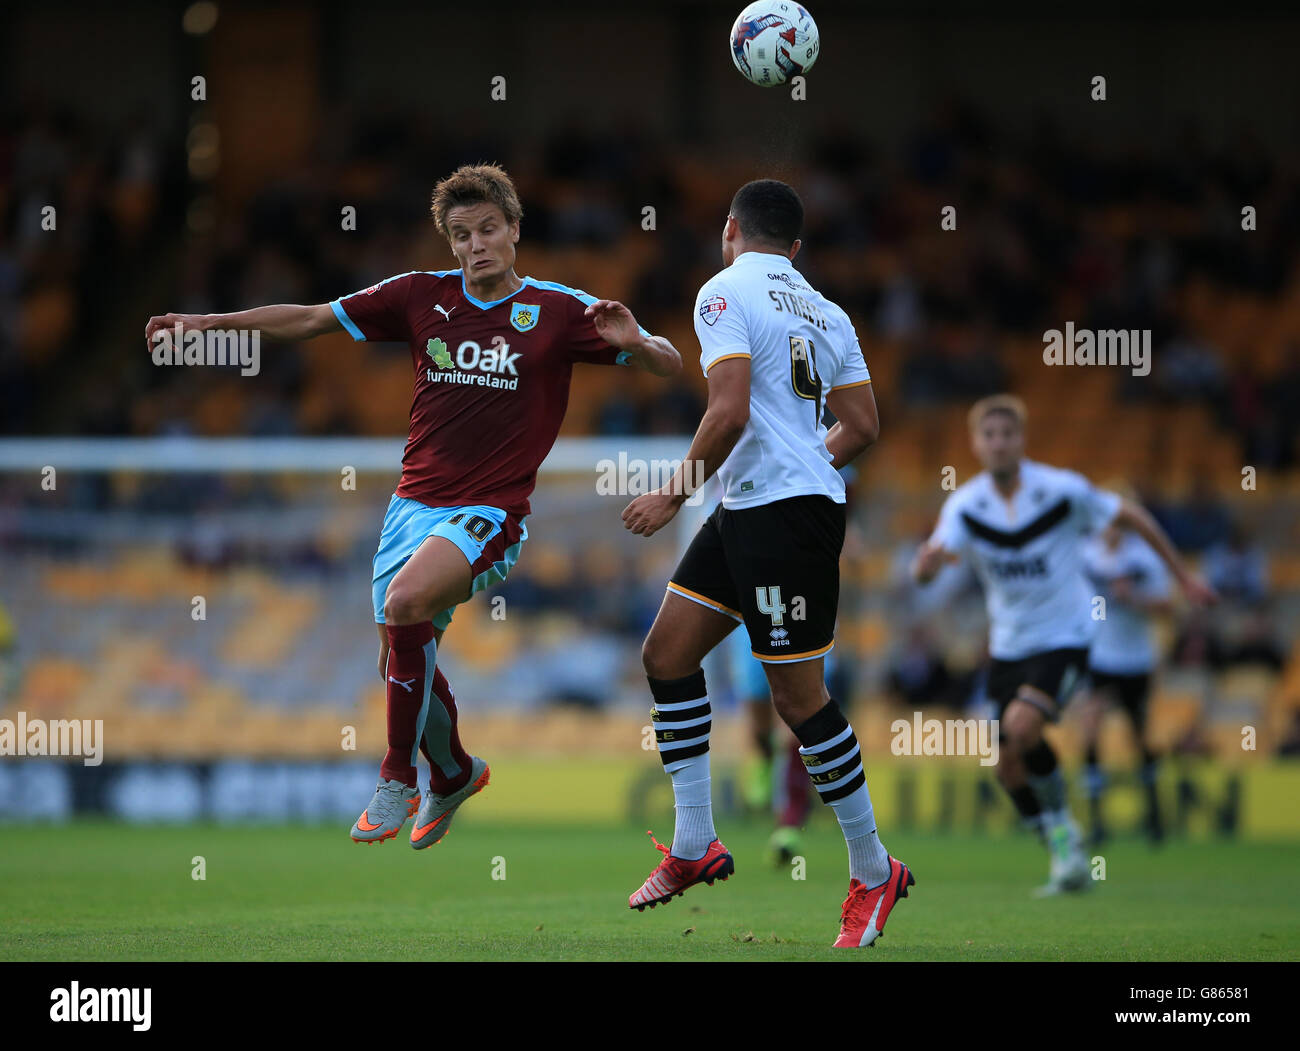 Burnley's Jelle Vossen challenges Port Vale's Remie Street (right) during the Capital One Cup, First Round match at Vale Park, Stoke-on-Trent. Stock Photo